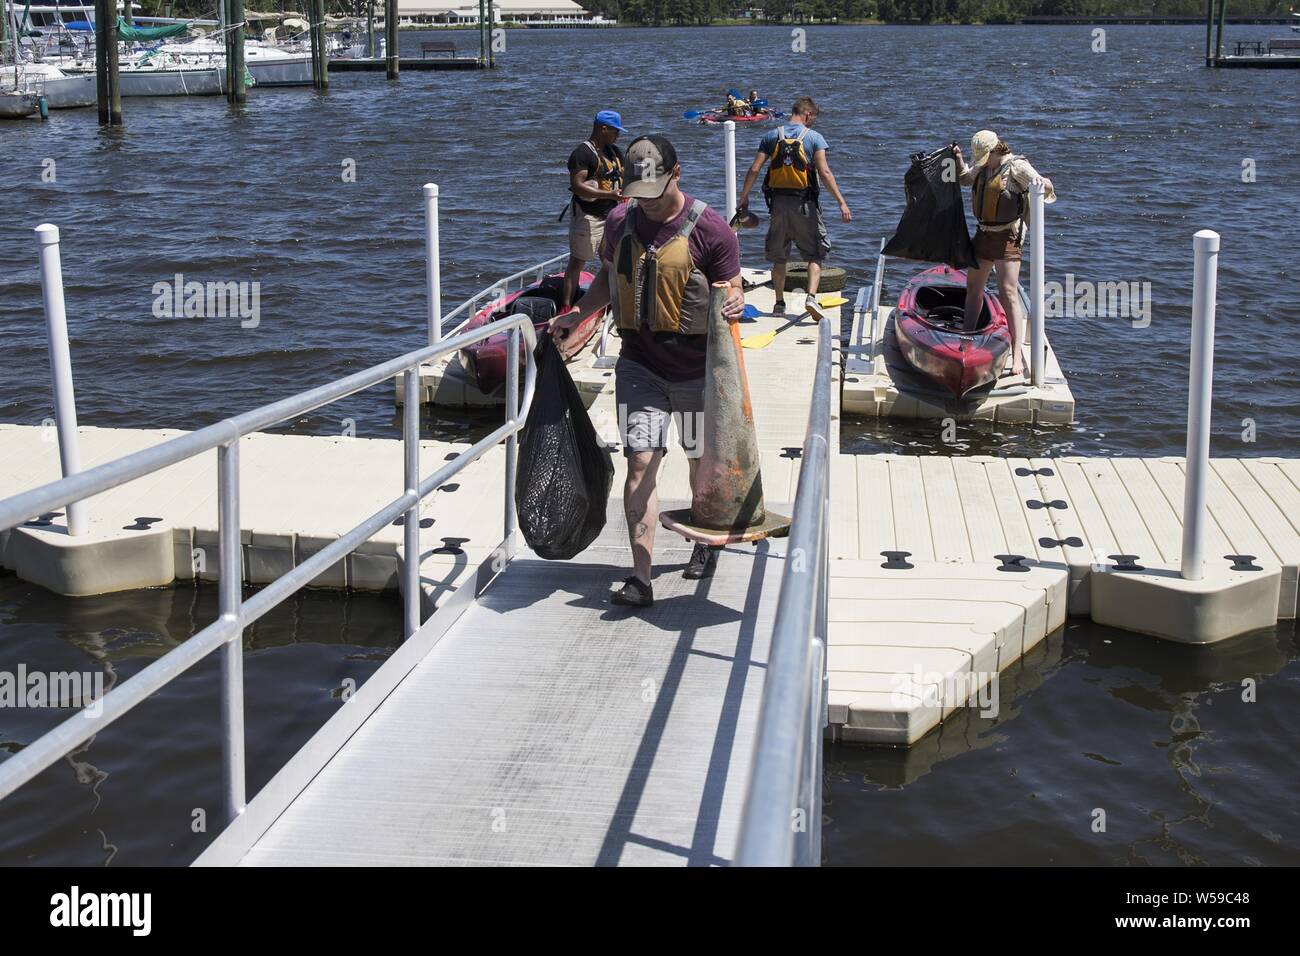 U.S. Marines from Marine Corps Air Station New River and Camp Lejeune return to the marina to dispose of garbage from the waterway of Gottschalk Marina, Camp Lejeune, N.C, July 25, 2019. July 25, 2019. In effort to keep Camp Lejeune and its surrounding areas clean, the Single Marine Program organized an opportunity for the community to come together to collect, and properly dispose of debris and trash that washed up along the shorelines. (U.S. Marine Corps photo by Cpl. Tiana Boyd). () Stock Photo